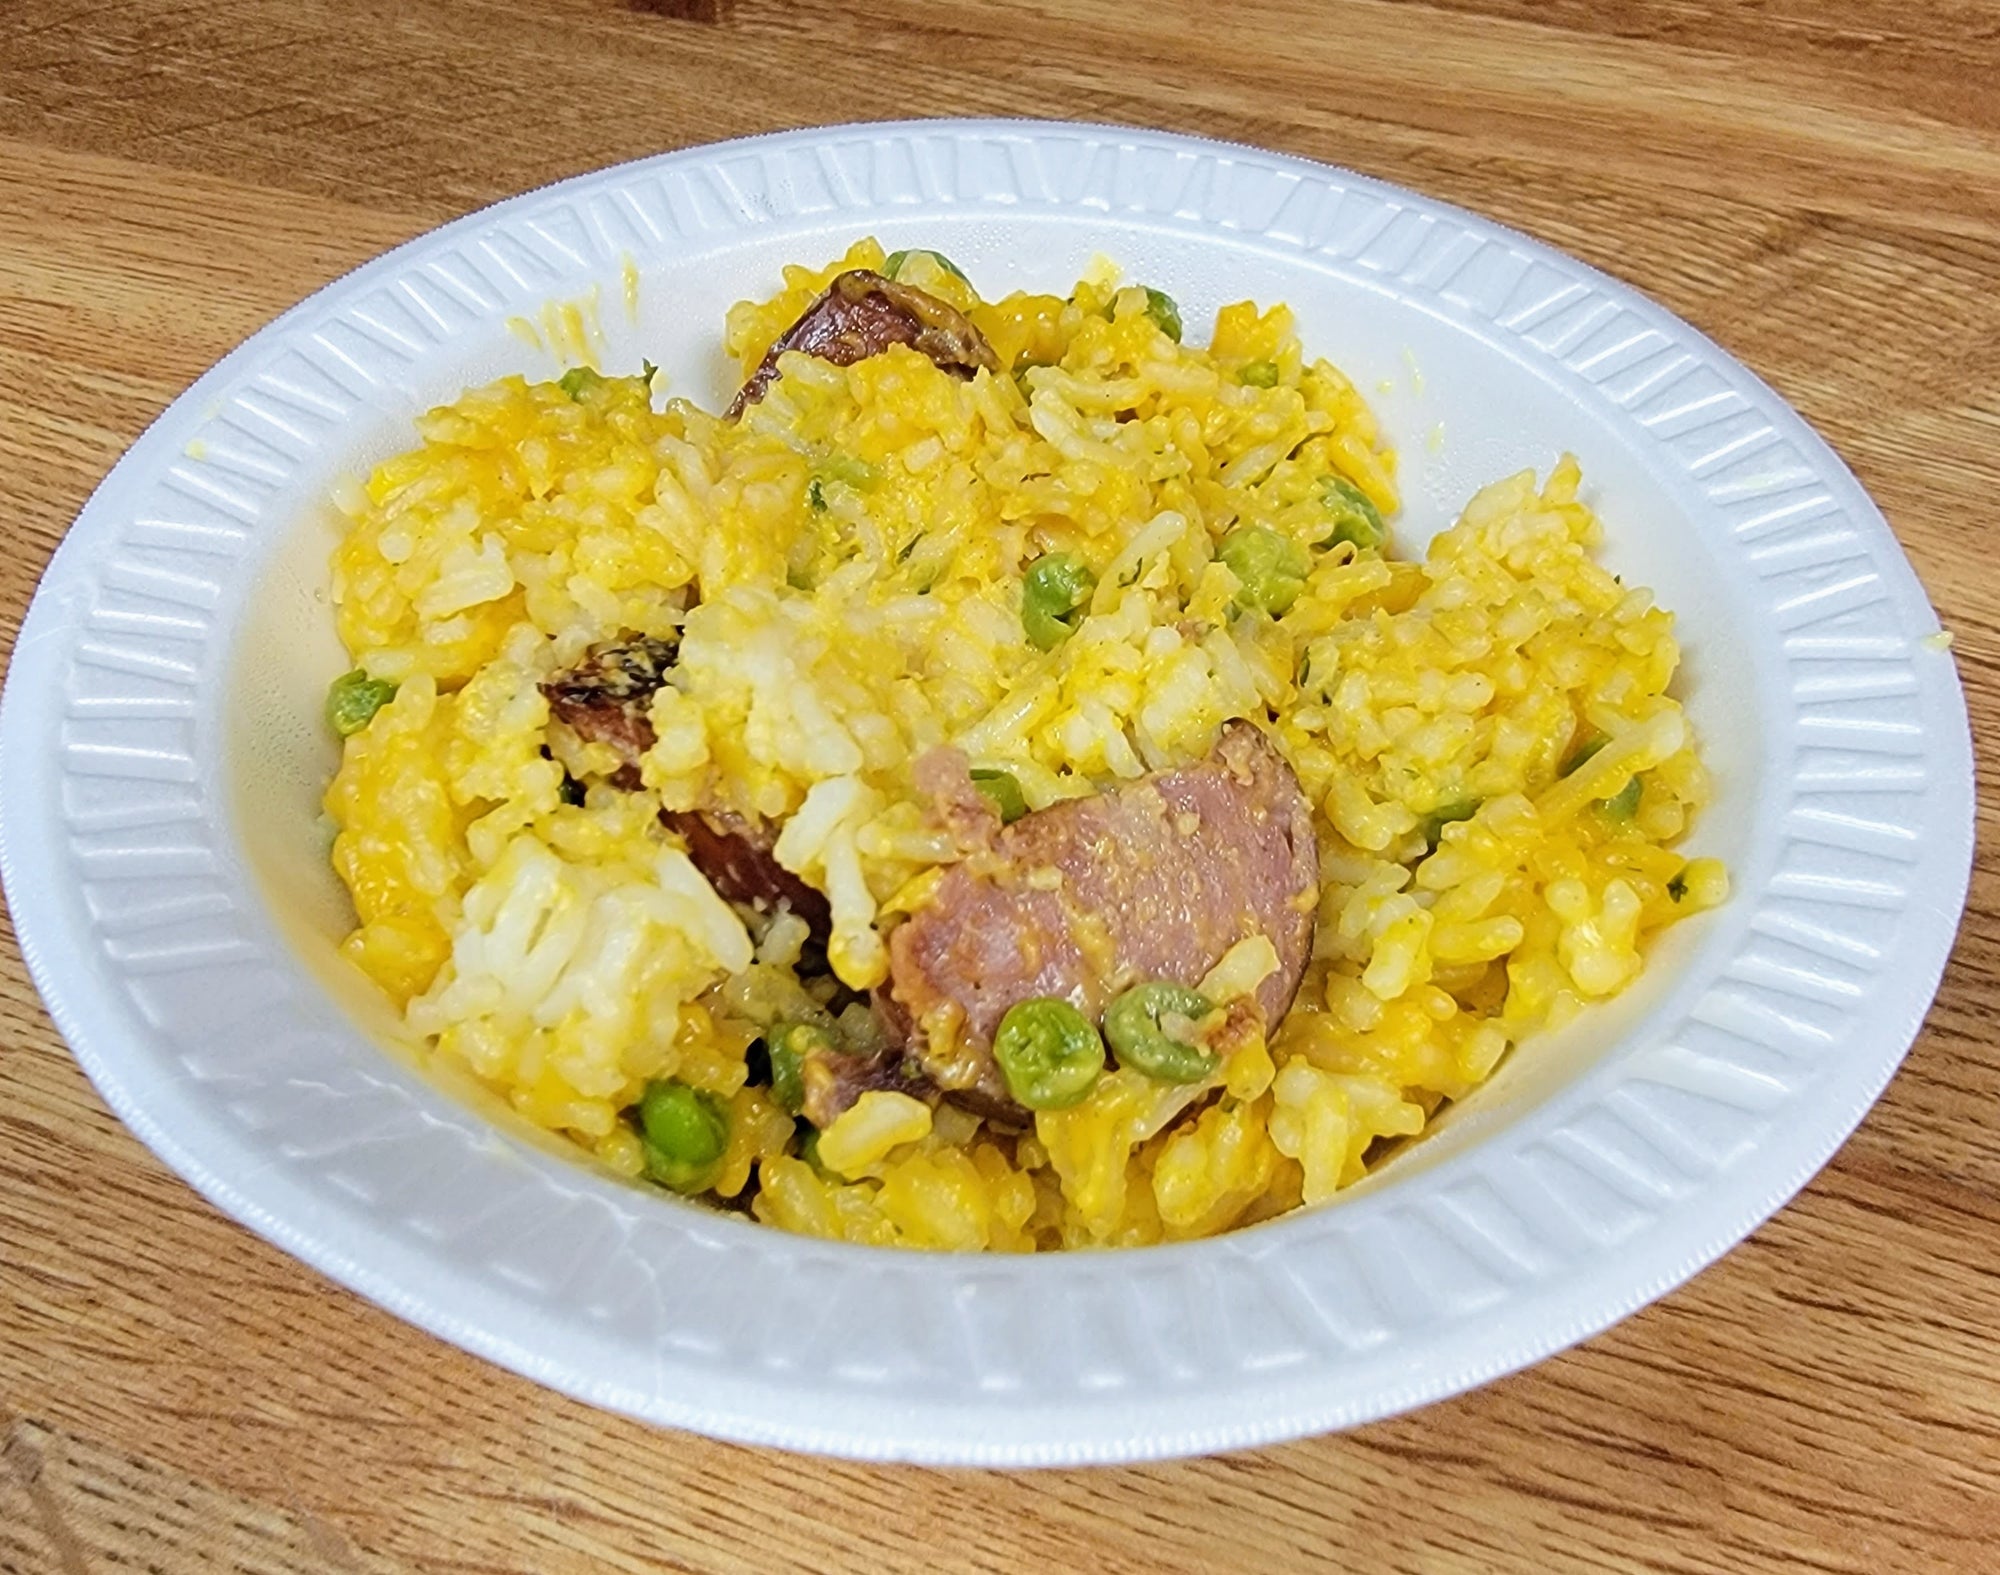 Bright Leaf Smoked Sausage and Cheesy Rice-A-Roni